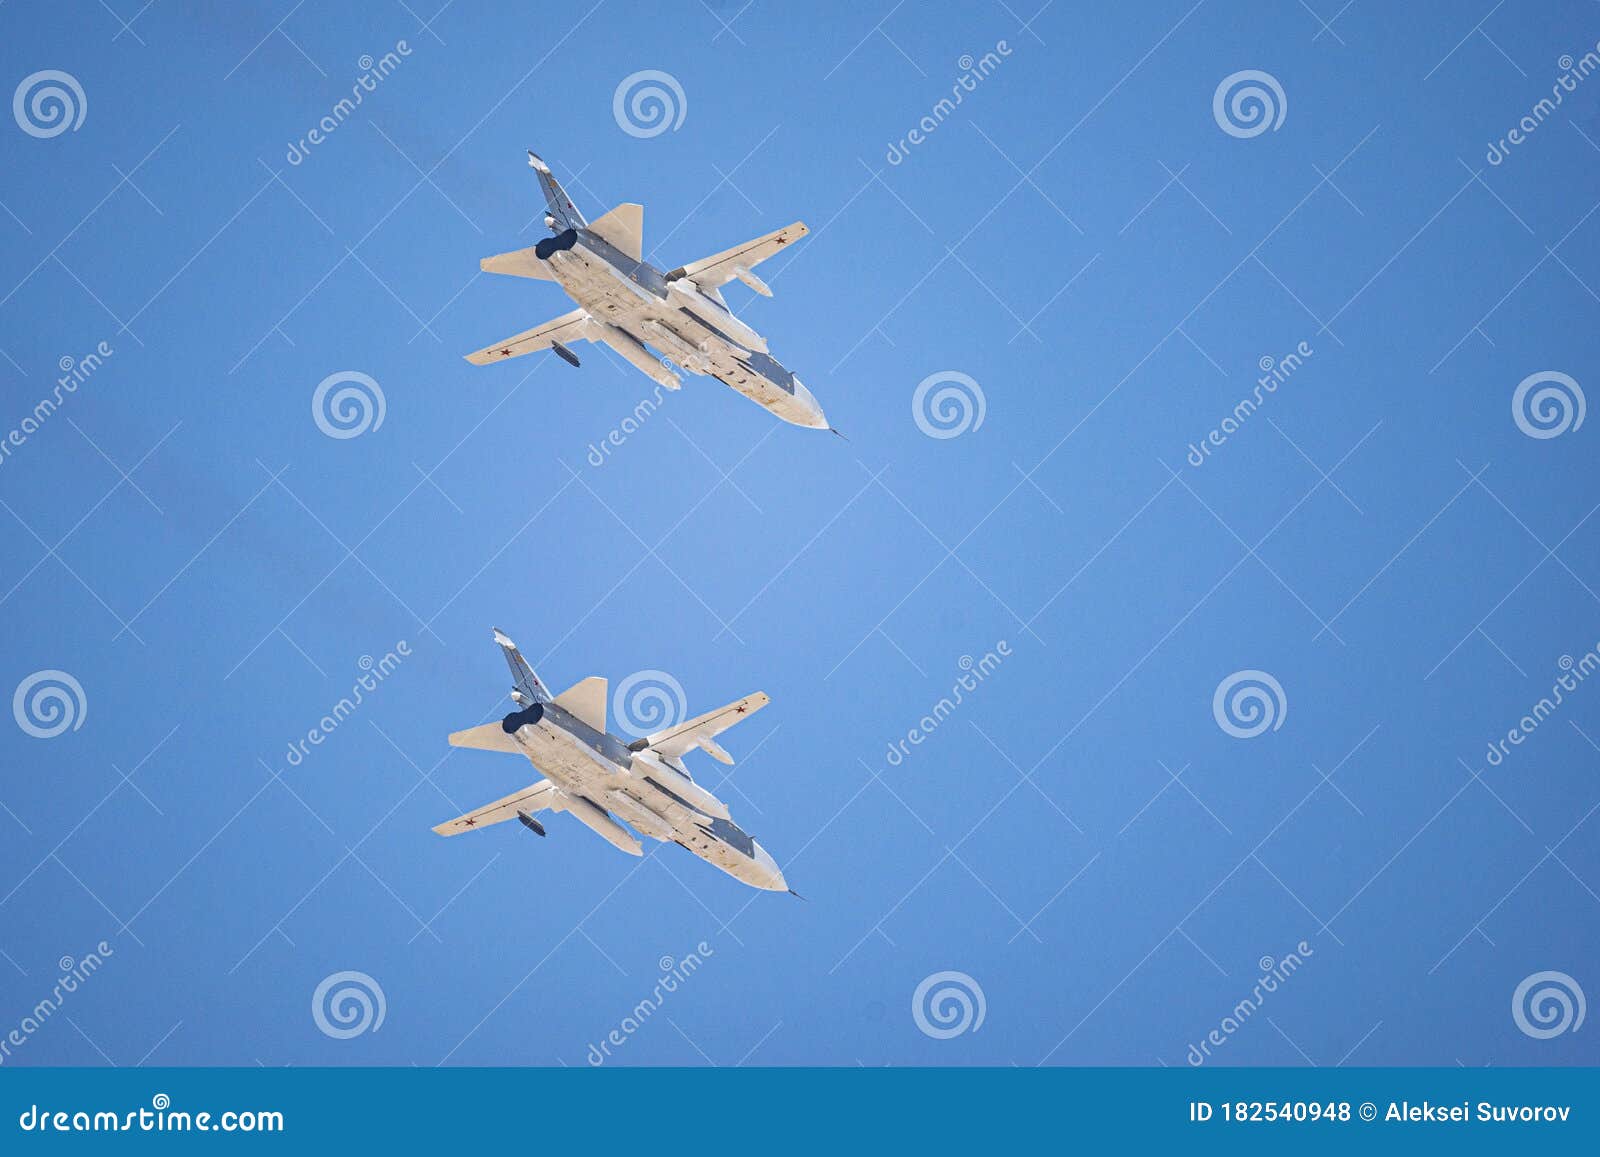 Russia Khabarovsk May 9 Su 24m2 Upgraded Front Line Bomber With Editorial Stock Photo Image Of Engine Atmosphere